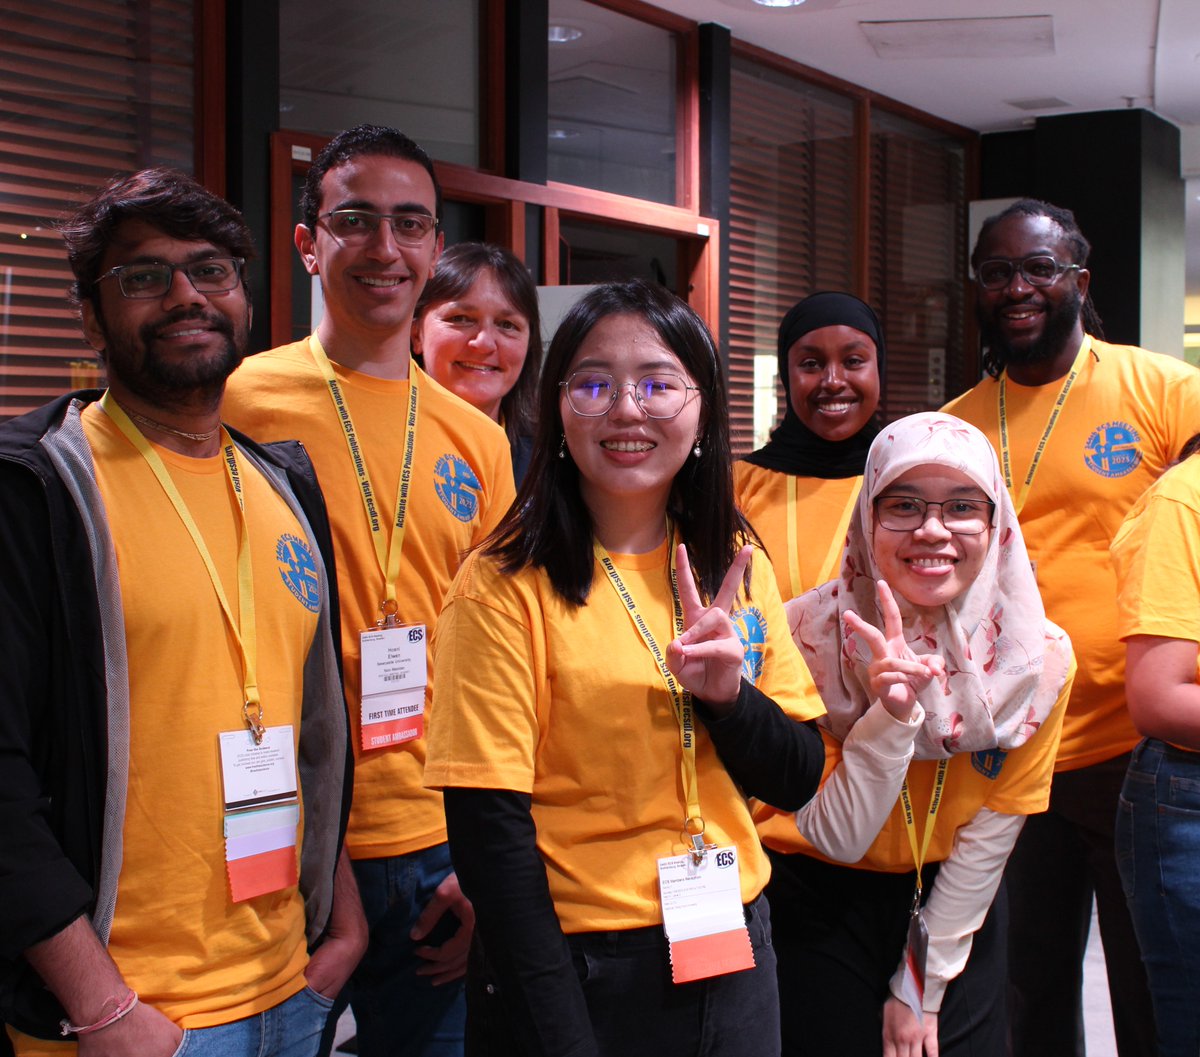 📢Calling all students! Become a Student Ambassador at the 245th ECS Meeting and unlock a world of opportunities. Enjoy perks like discounted registration, free event tickets, networking, and more. Apply by May 12th and make your mark! electrochem.org/ecsnews/245-st… #ECS245